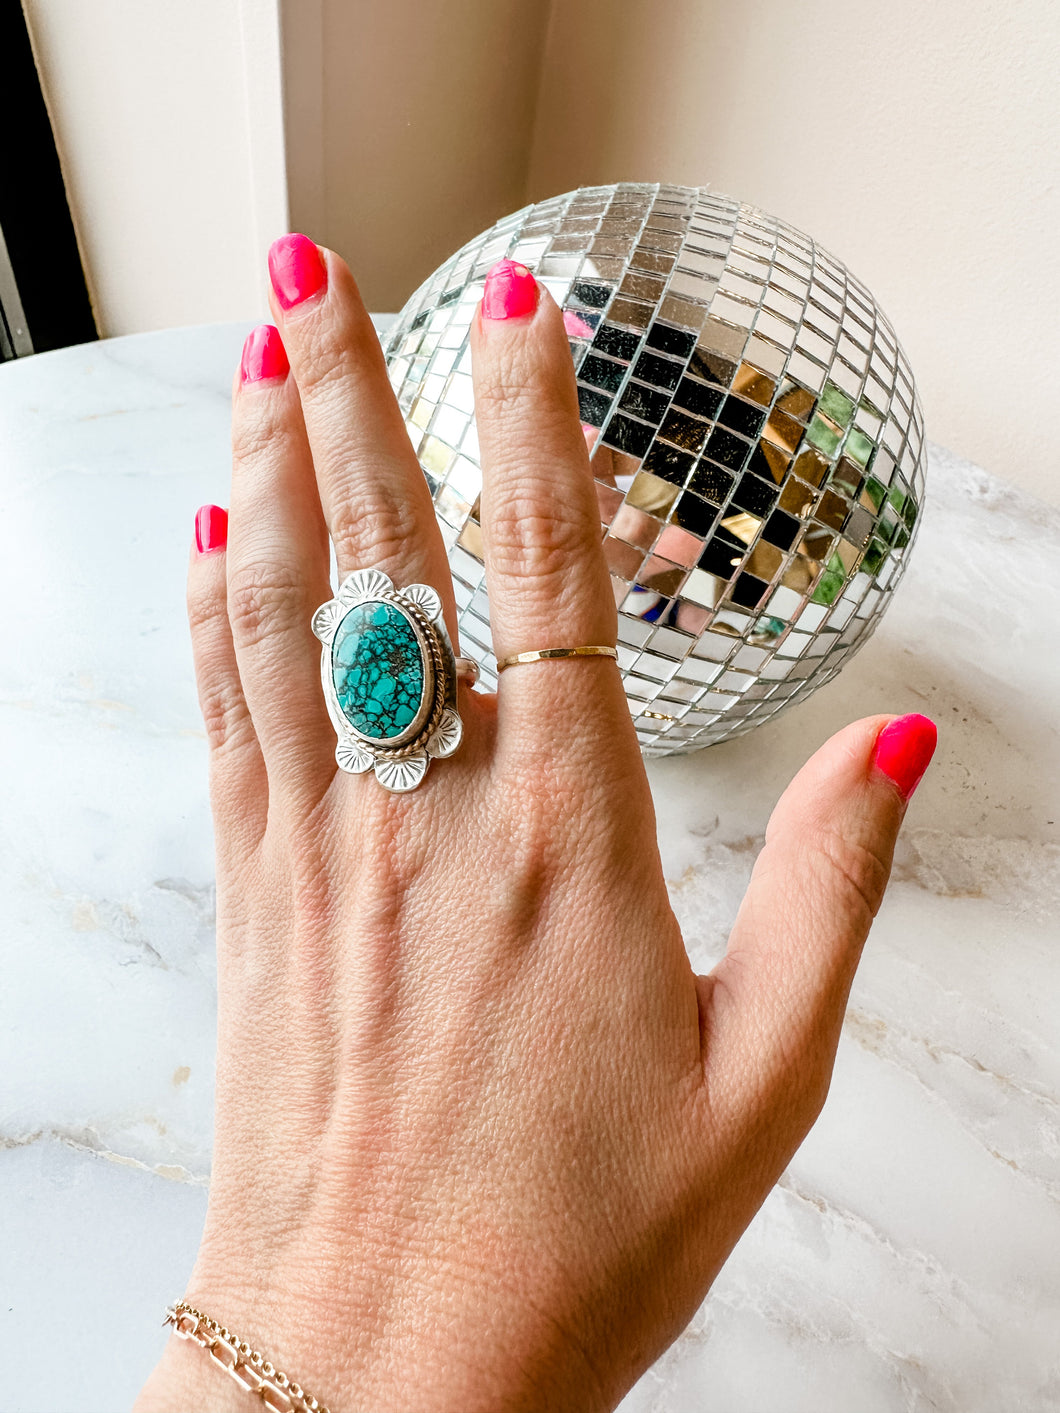 Stamped Detail Turquoise Statement Ring size 7